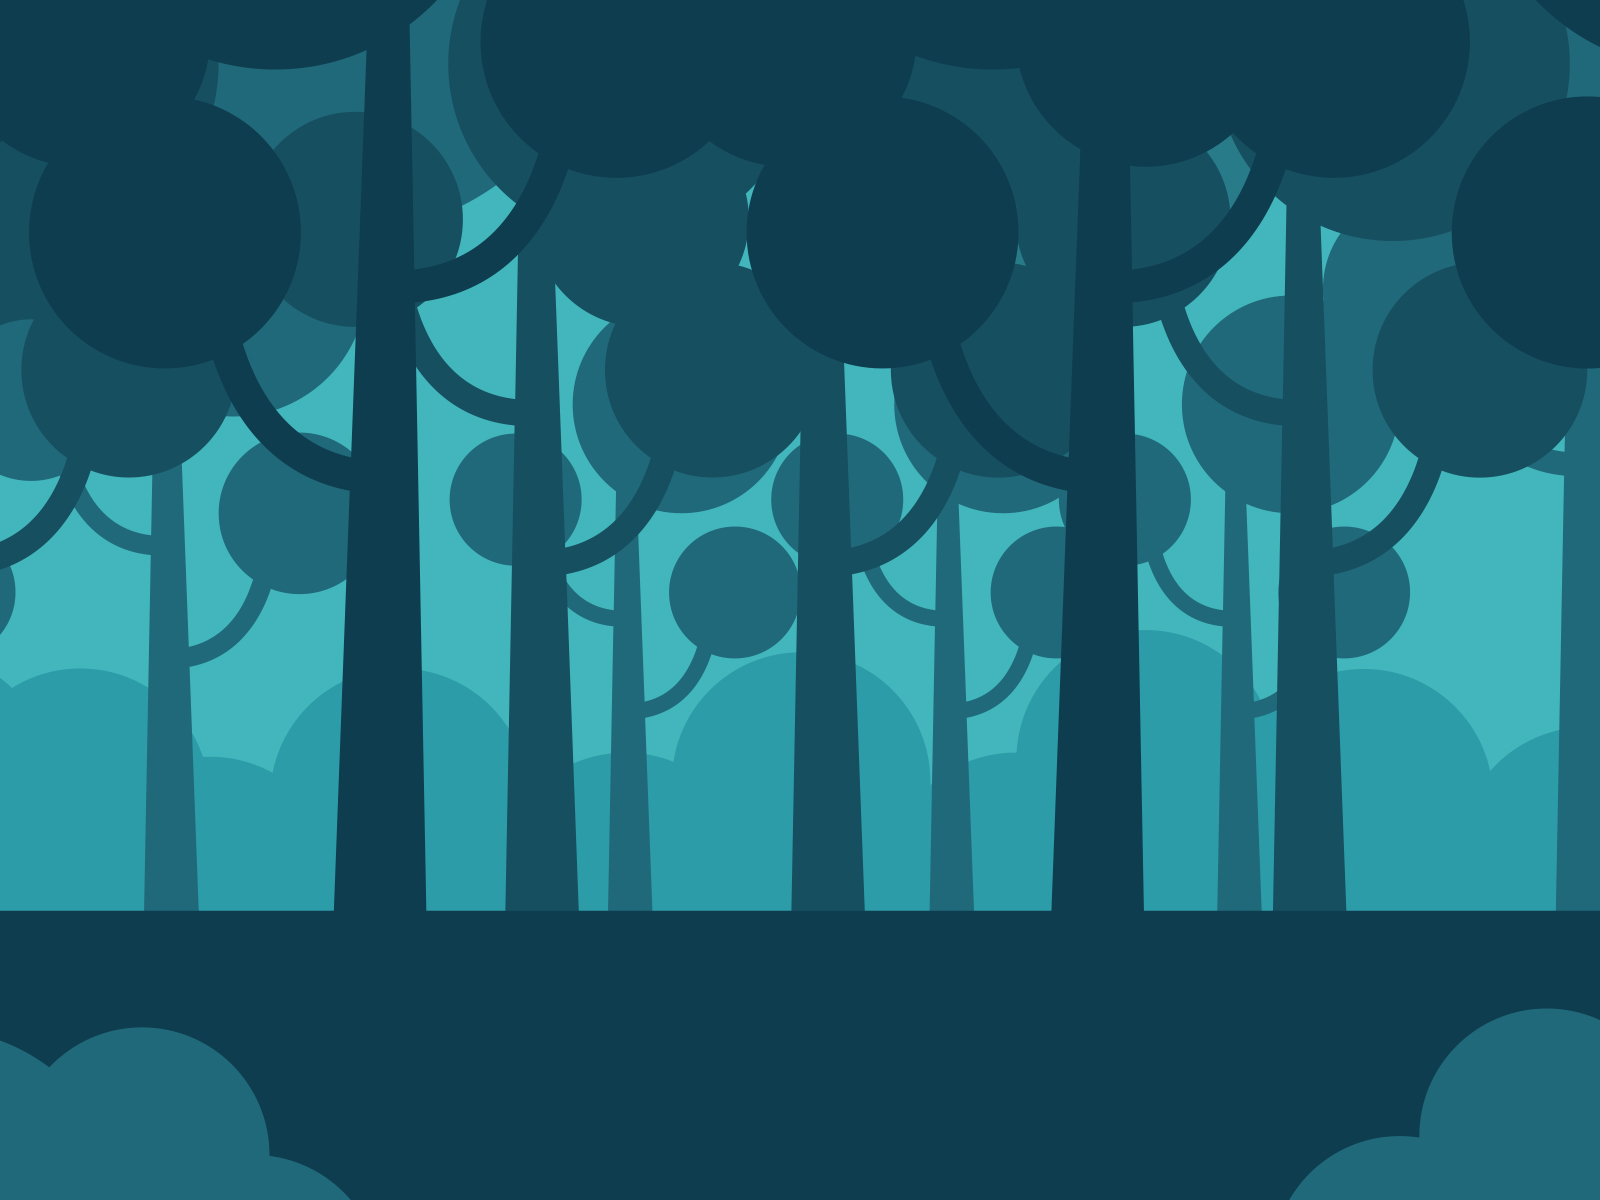 Avatar Forest Backgrounds | Blue, Nature, White Templates | Free PPT  Grounds and PowerPoint